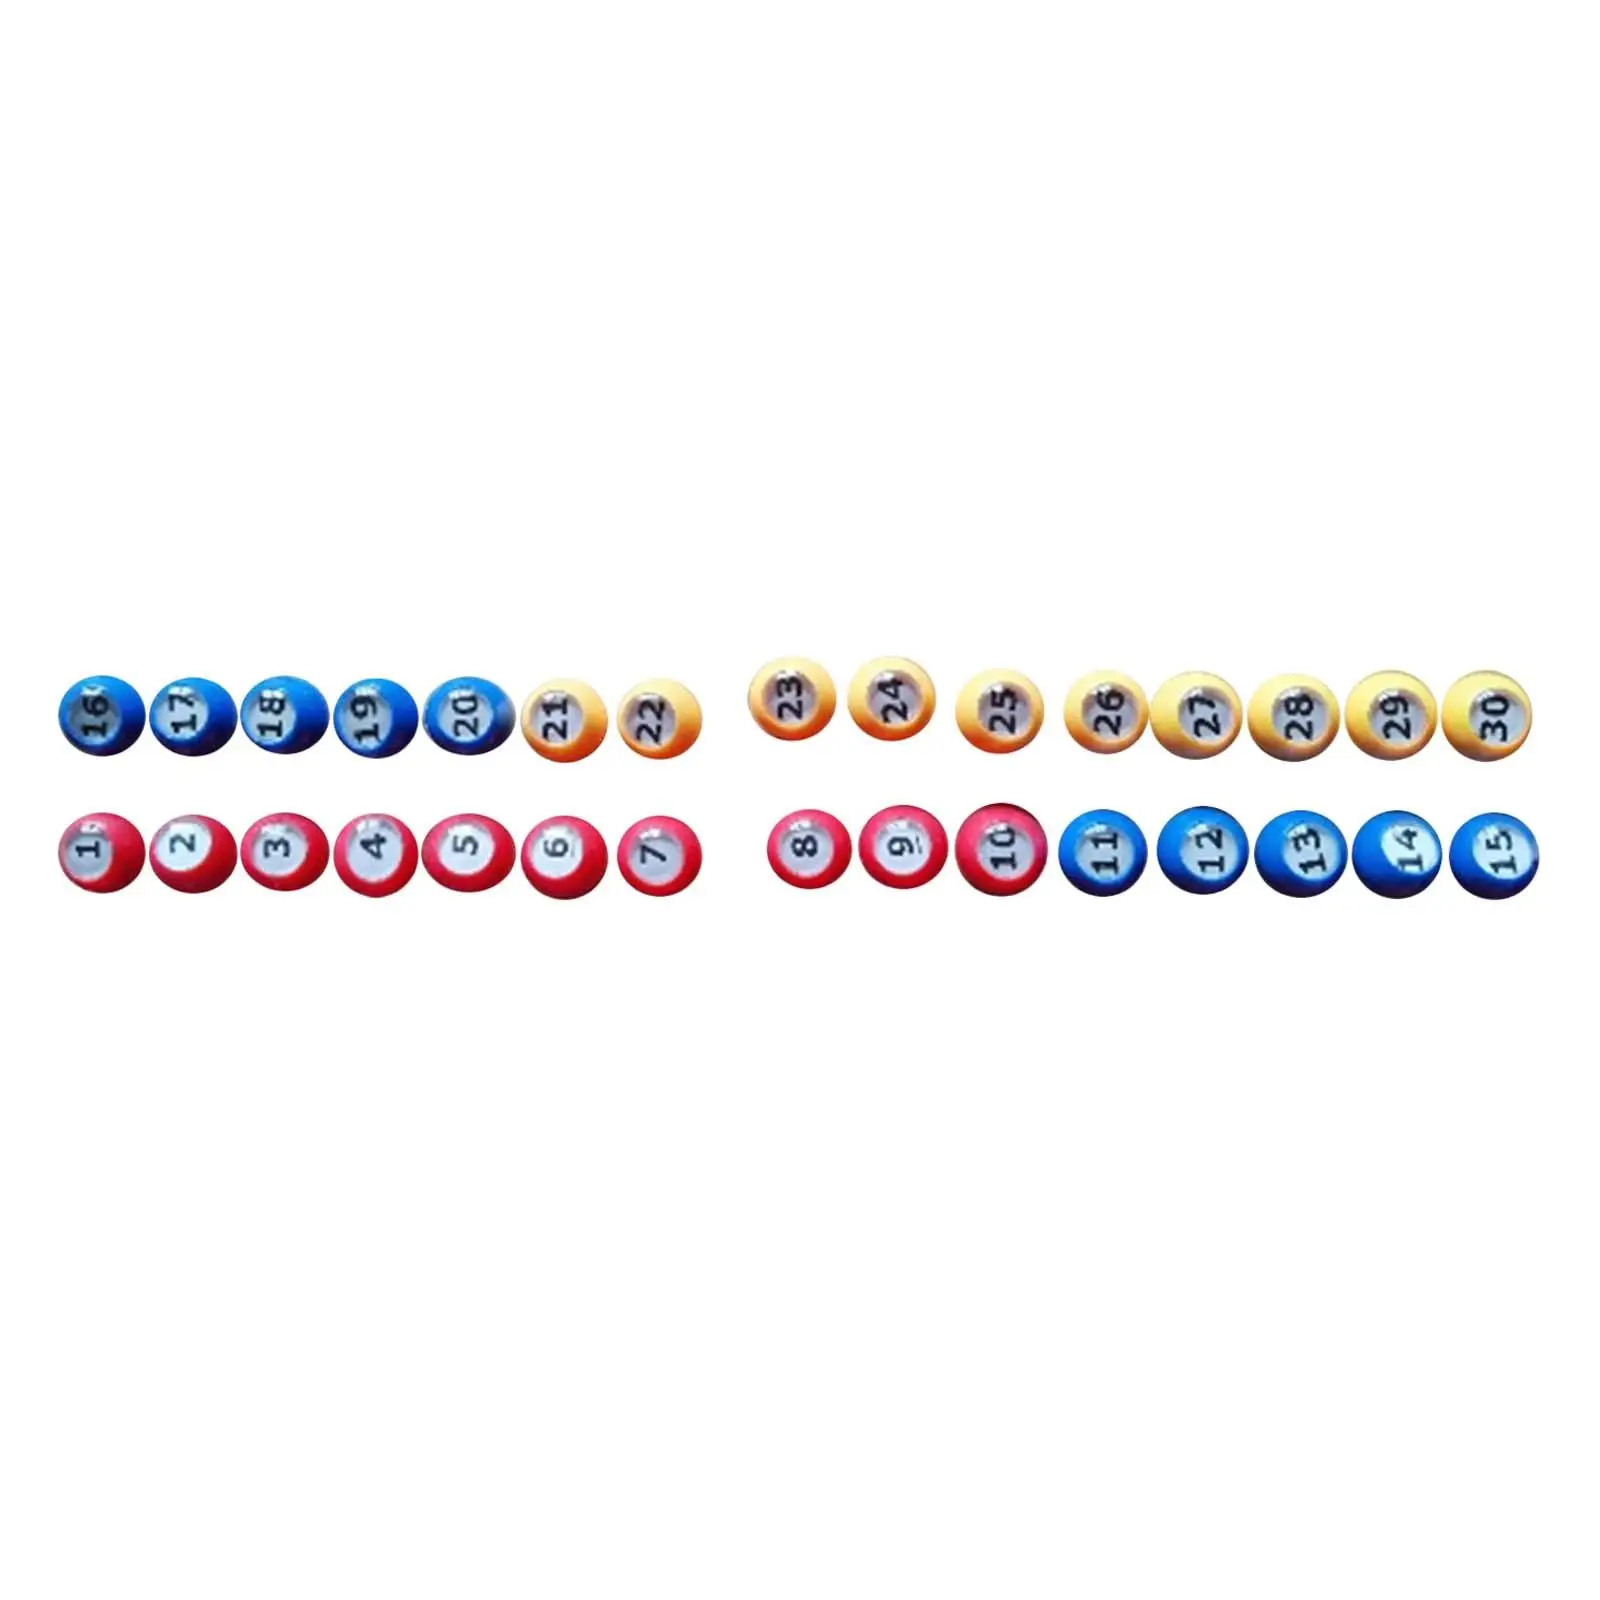 30 Pieces Bingo Ball Universal Equipment Portable Direct Replaces Durable Tally